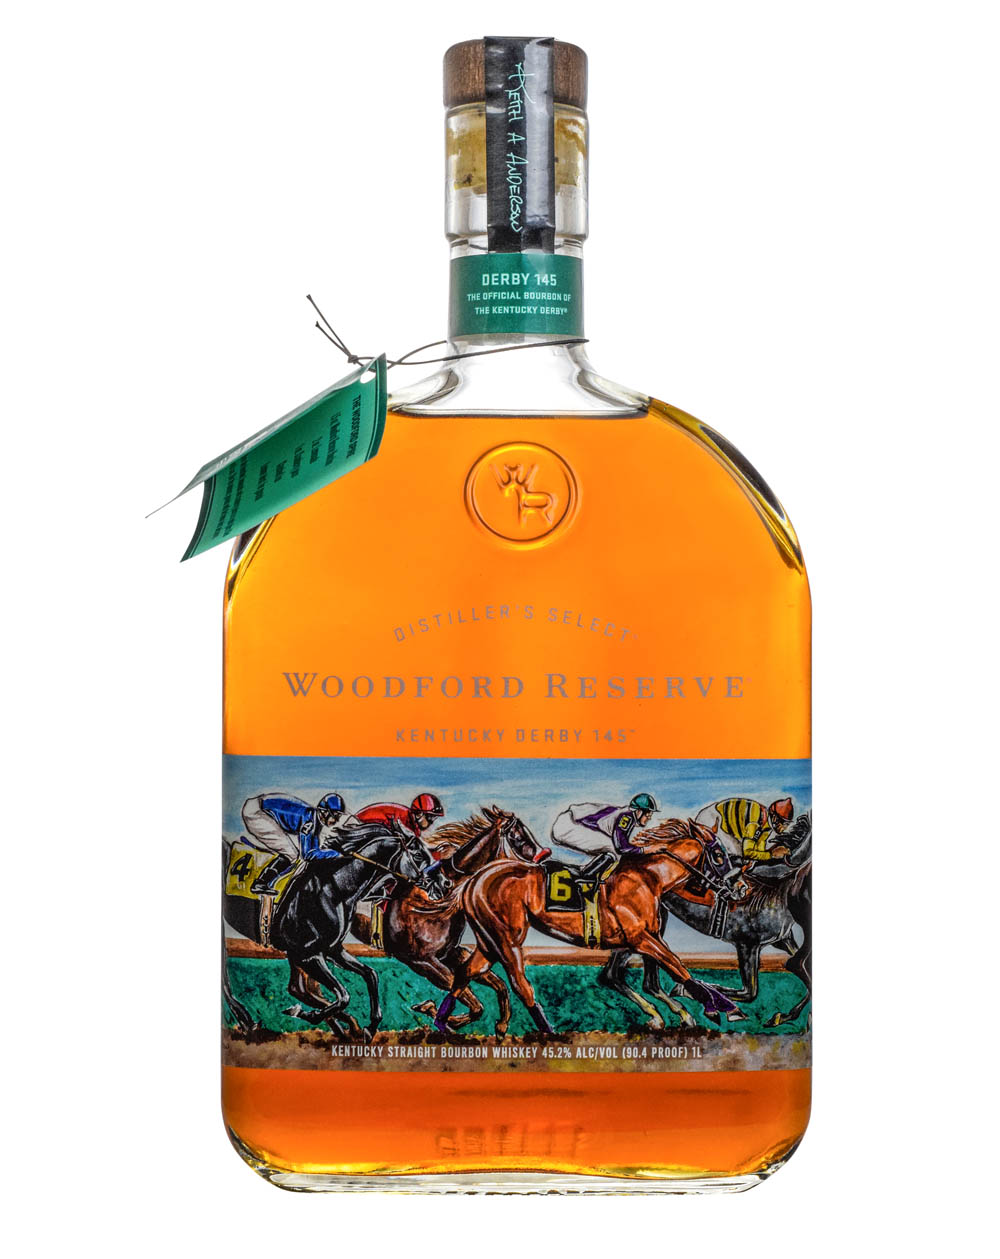 Woodford Reserve Kentucky Derby 145 Musthave Malts